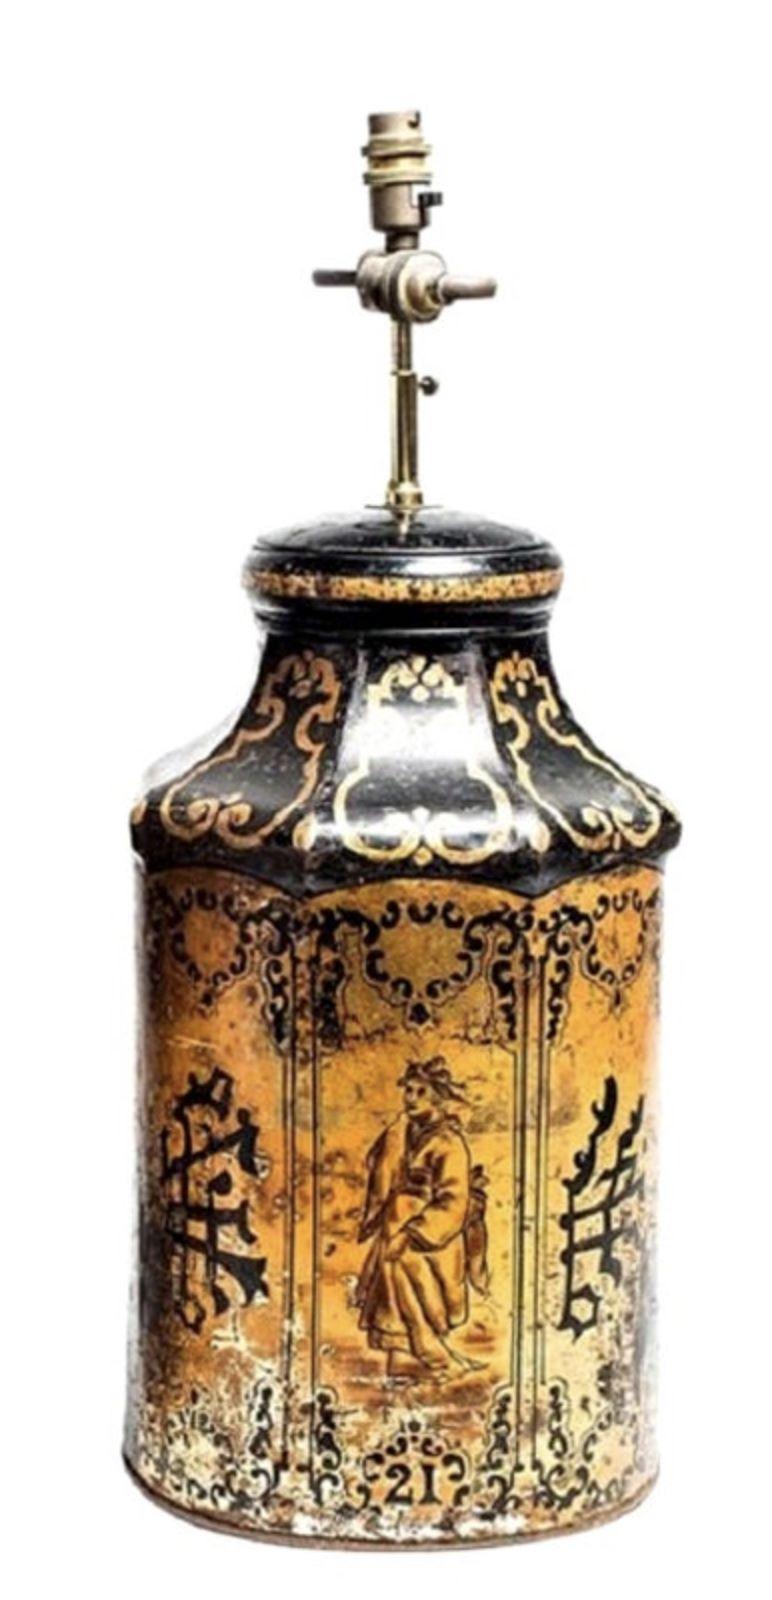 Unique table lamp made from repurposed Chinese Export tea tins, made in China circa 1870. This ornate, gilded tin was once used to transport tea from China to England. This jar is hand-painted with a fascinating combination of Western and Asian